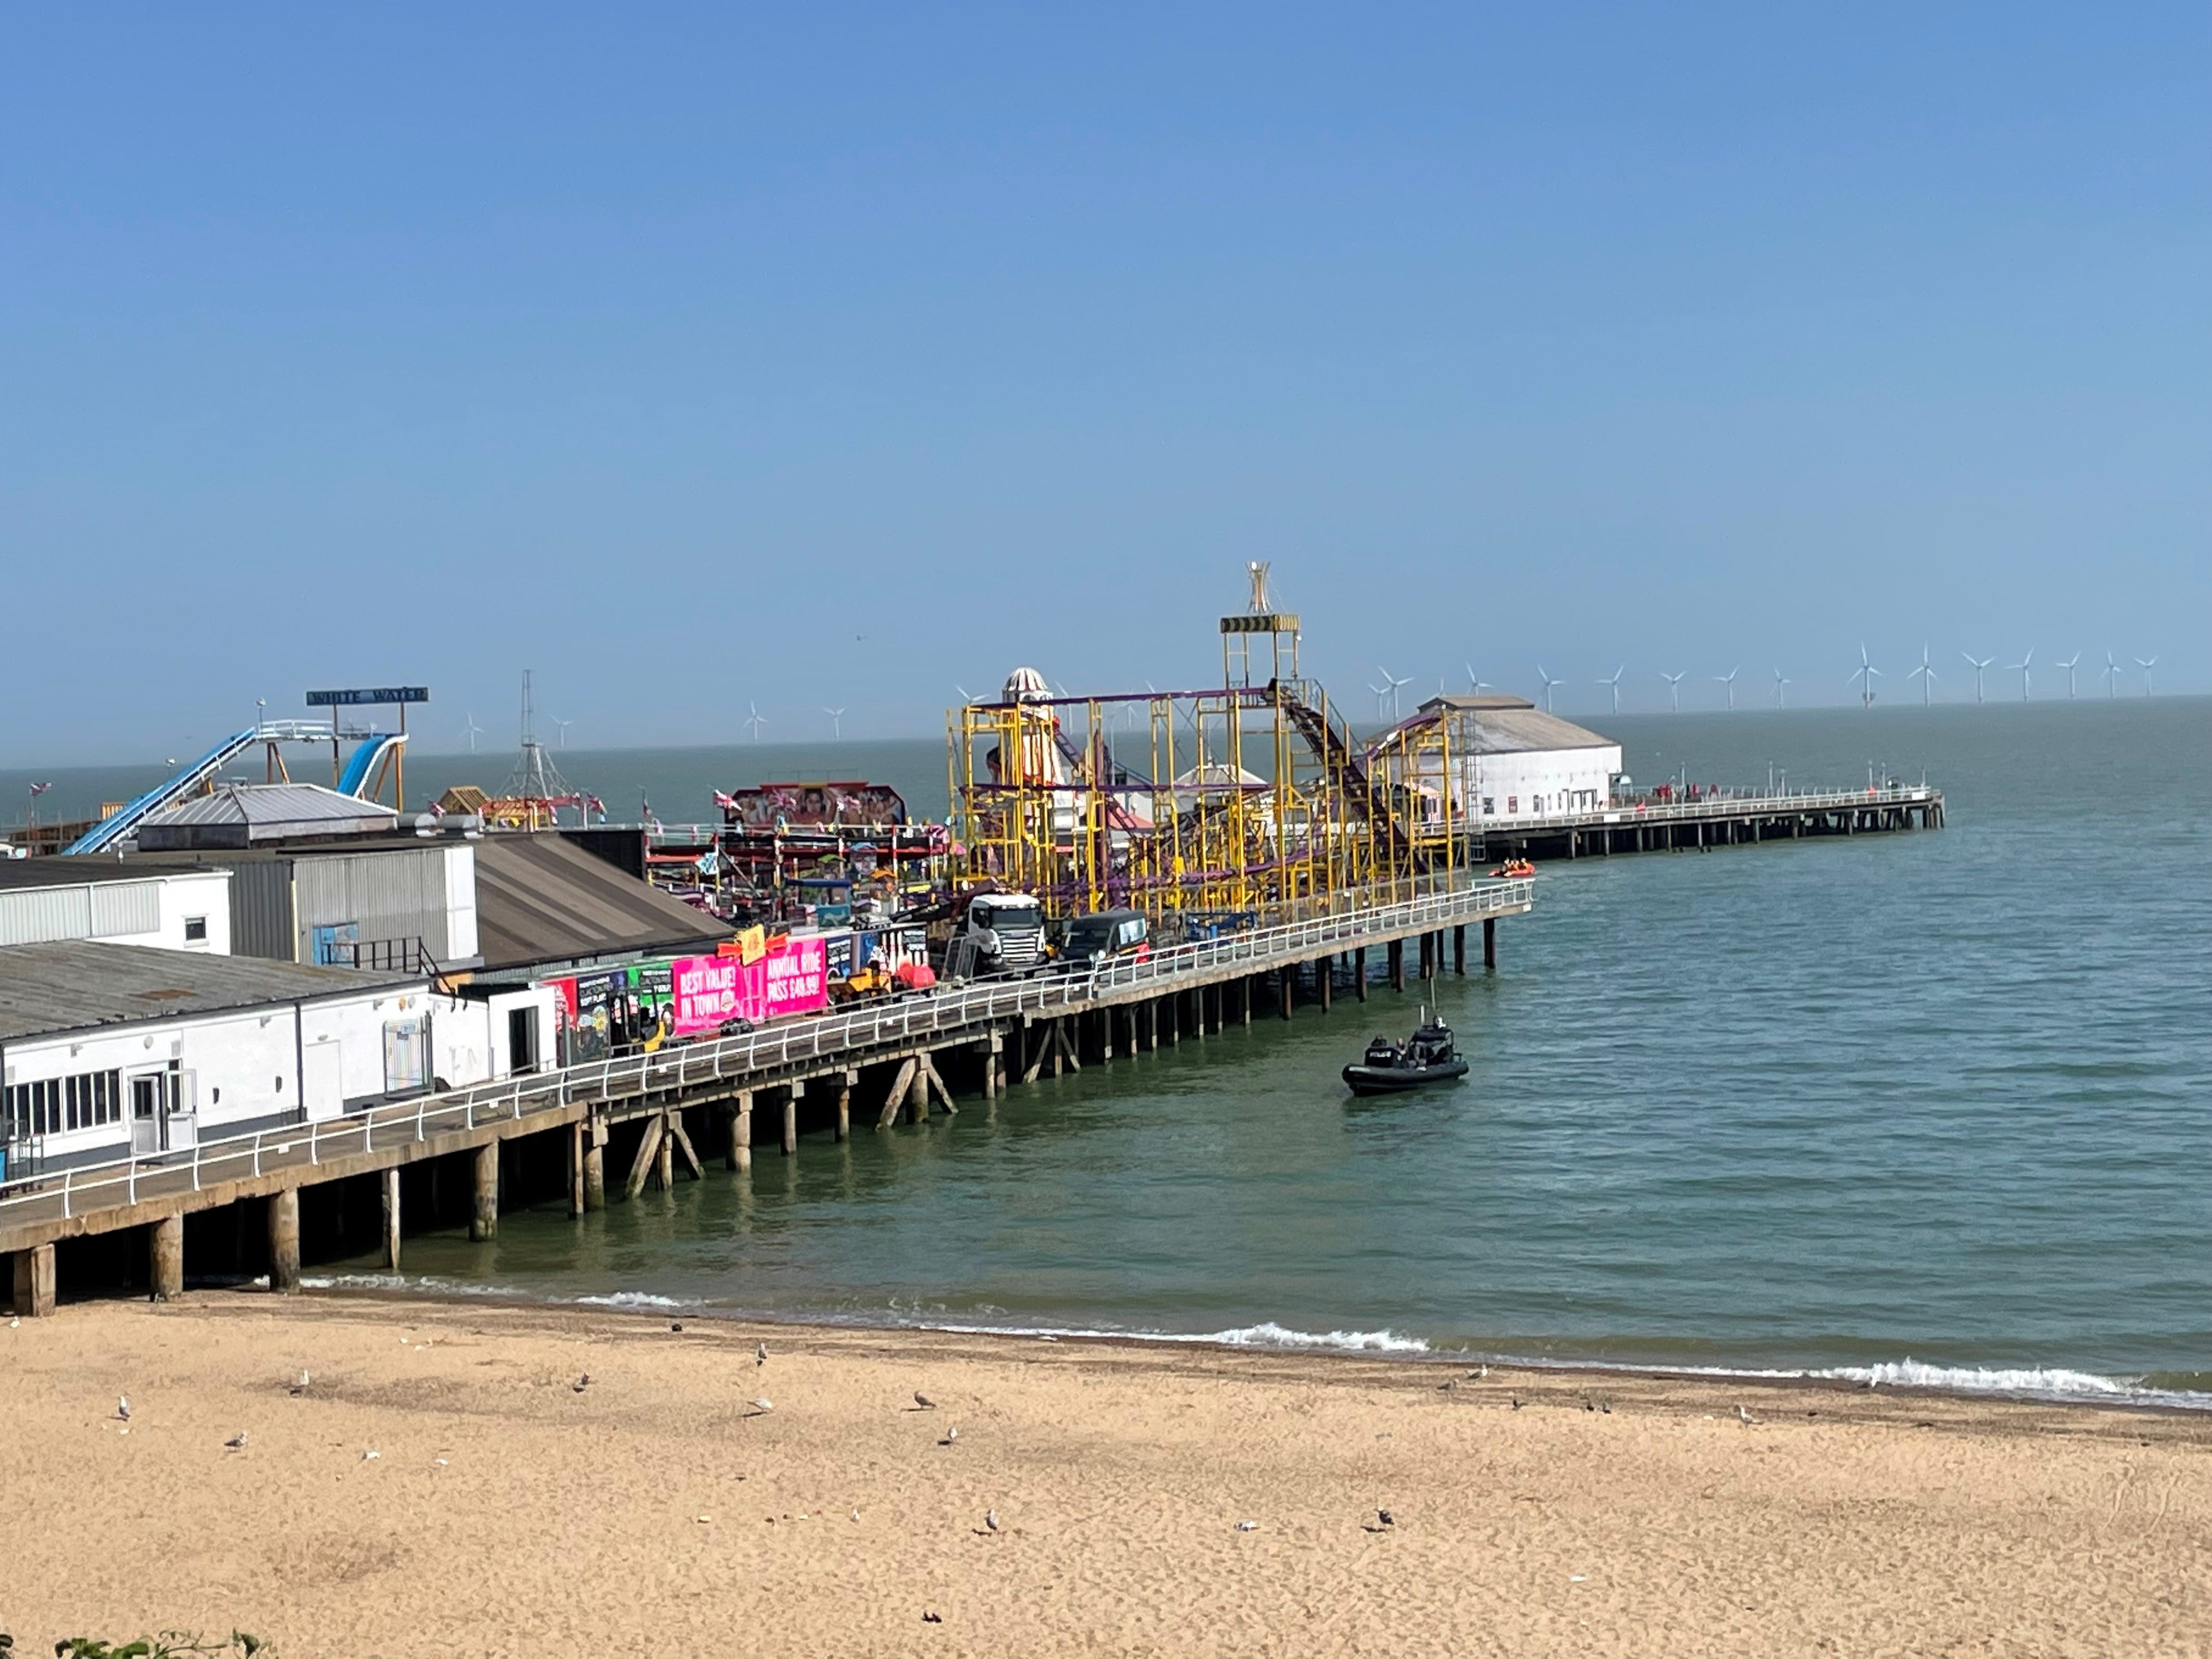 The 21-year-old went missing in water near Clacton Pier on Tuesday – the UK’s hottest day (Sam Russell/PA)